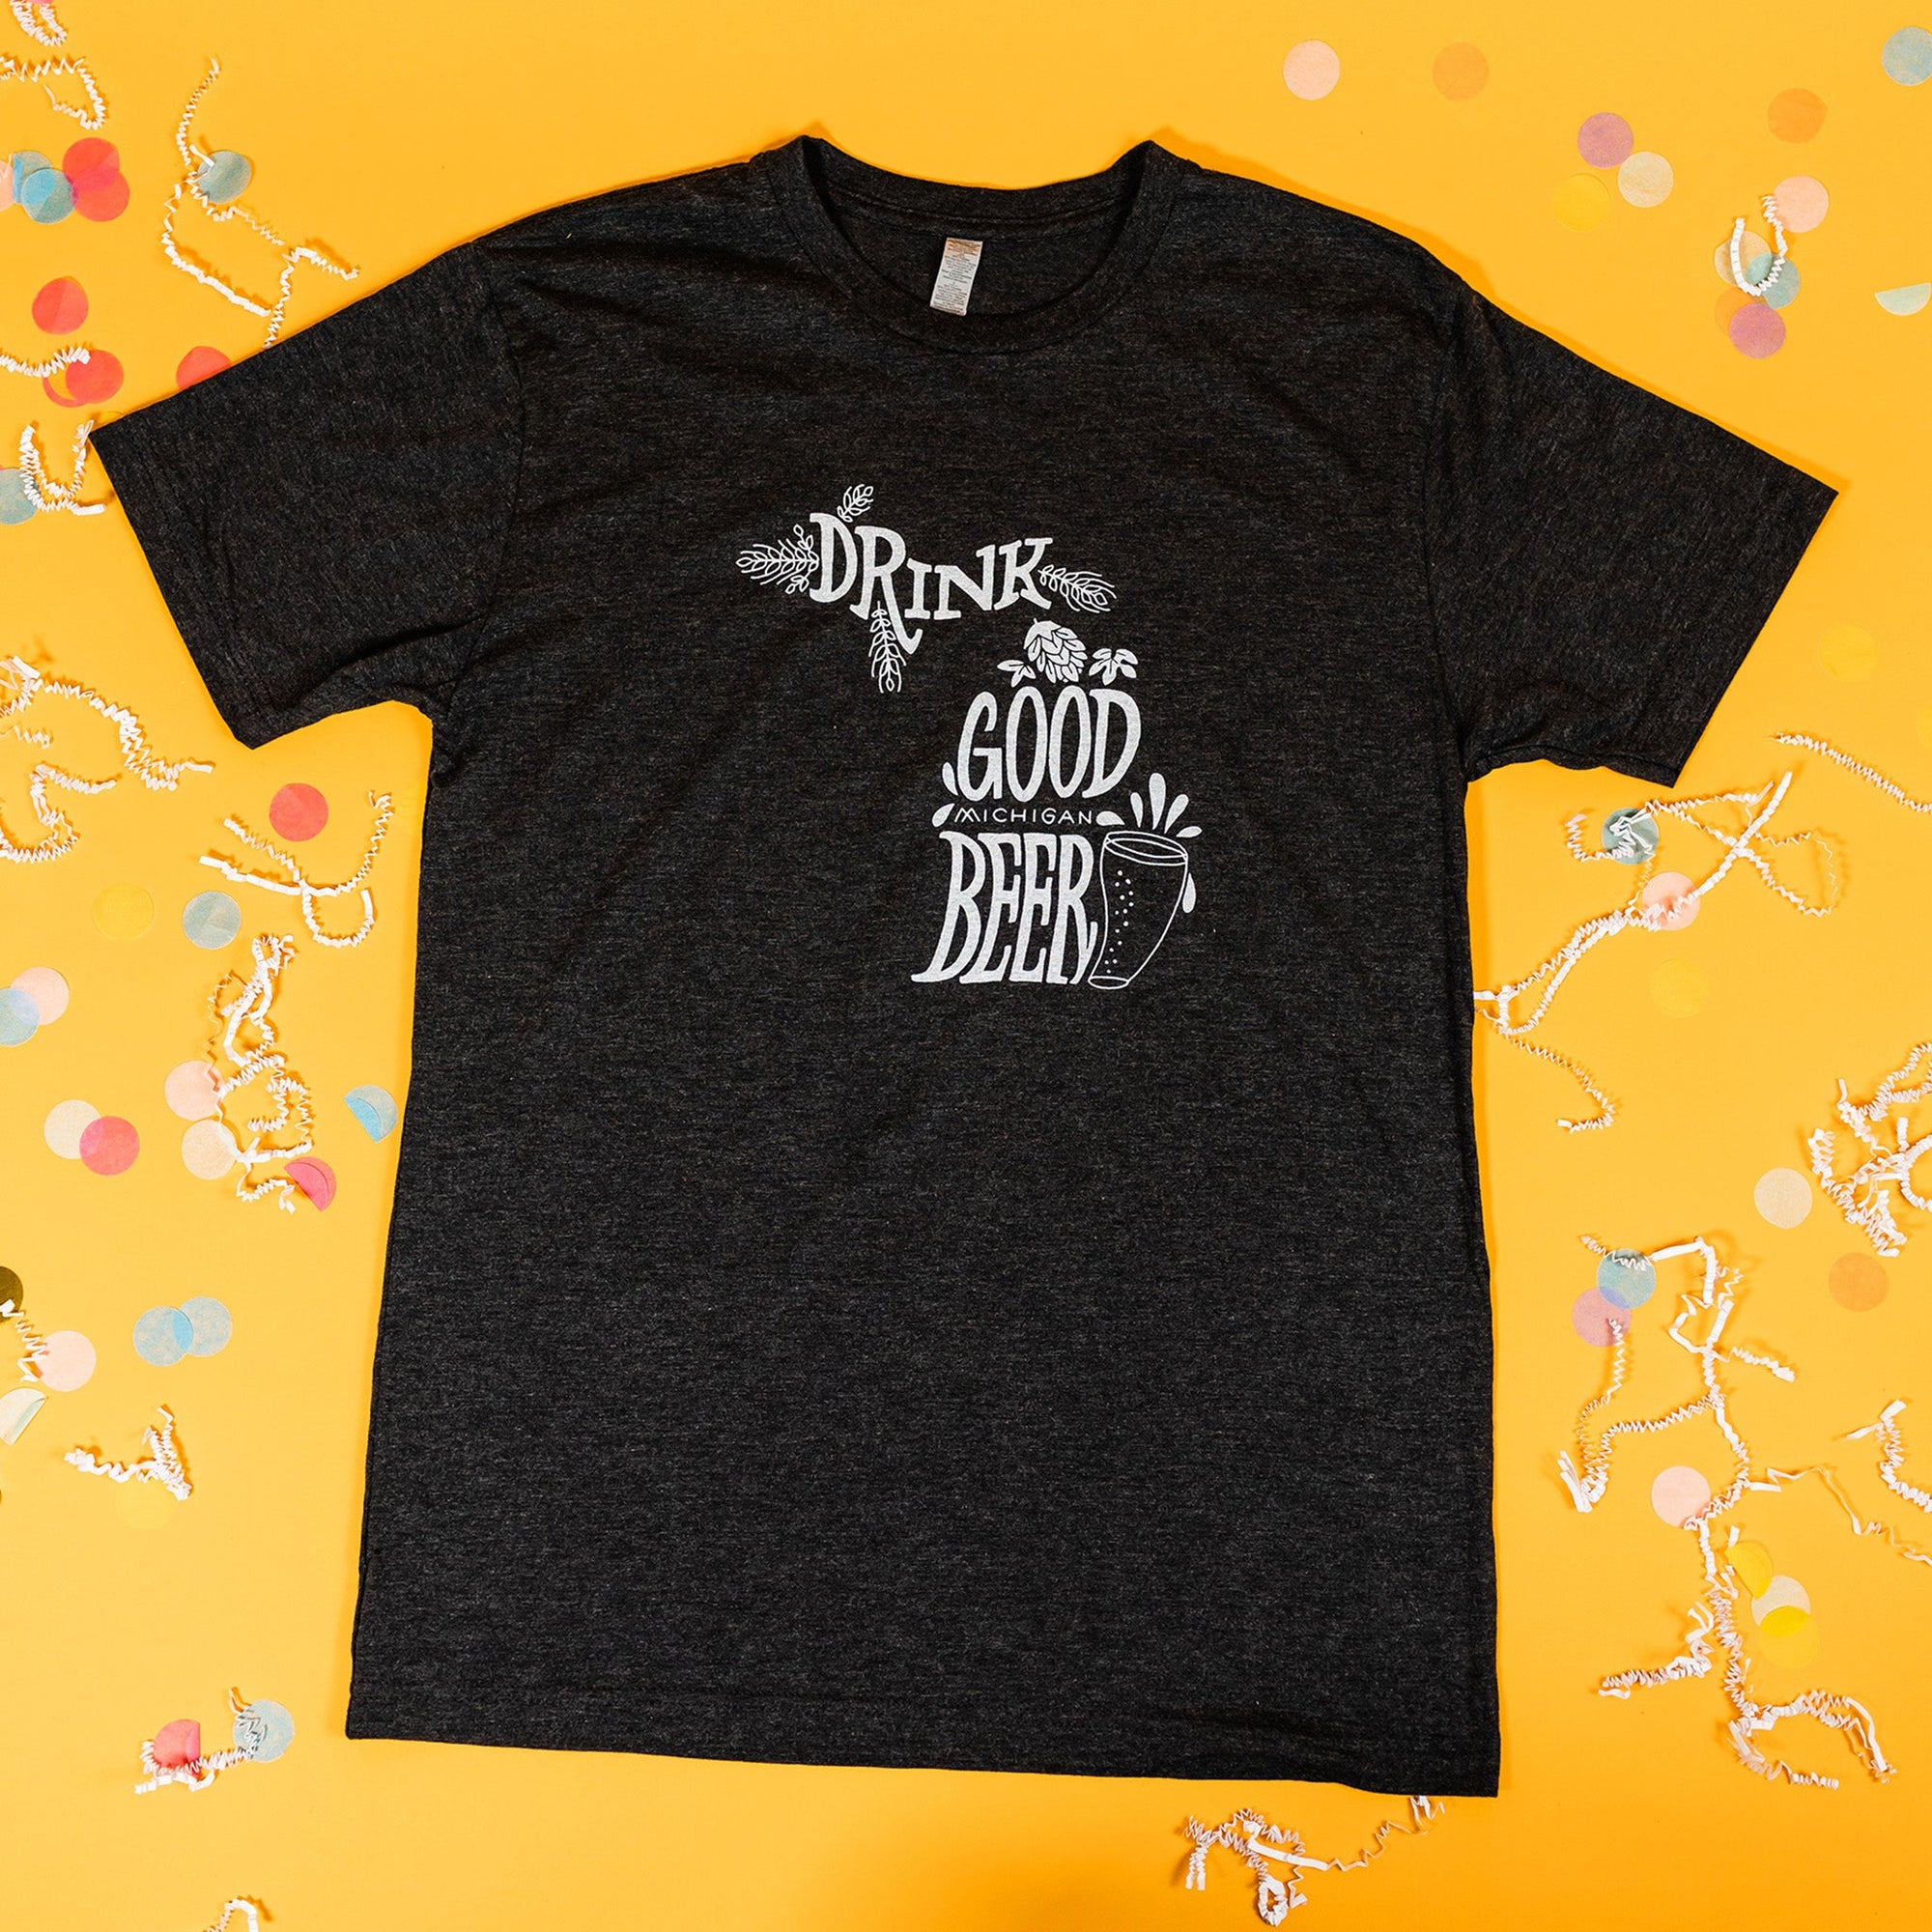 On a sunny mustard background sits a t-shirt with white crinkle and big, colorful confetti scattered around. There are mini disco balls, sunglasses, and a pair of white sneakers. This heathered charcoal grey tee features an illustration of a beer with hops and hand lettered "DRINK GOOD MICHIGAN BEER" in white.